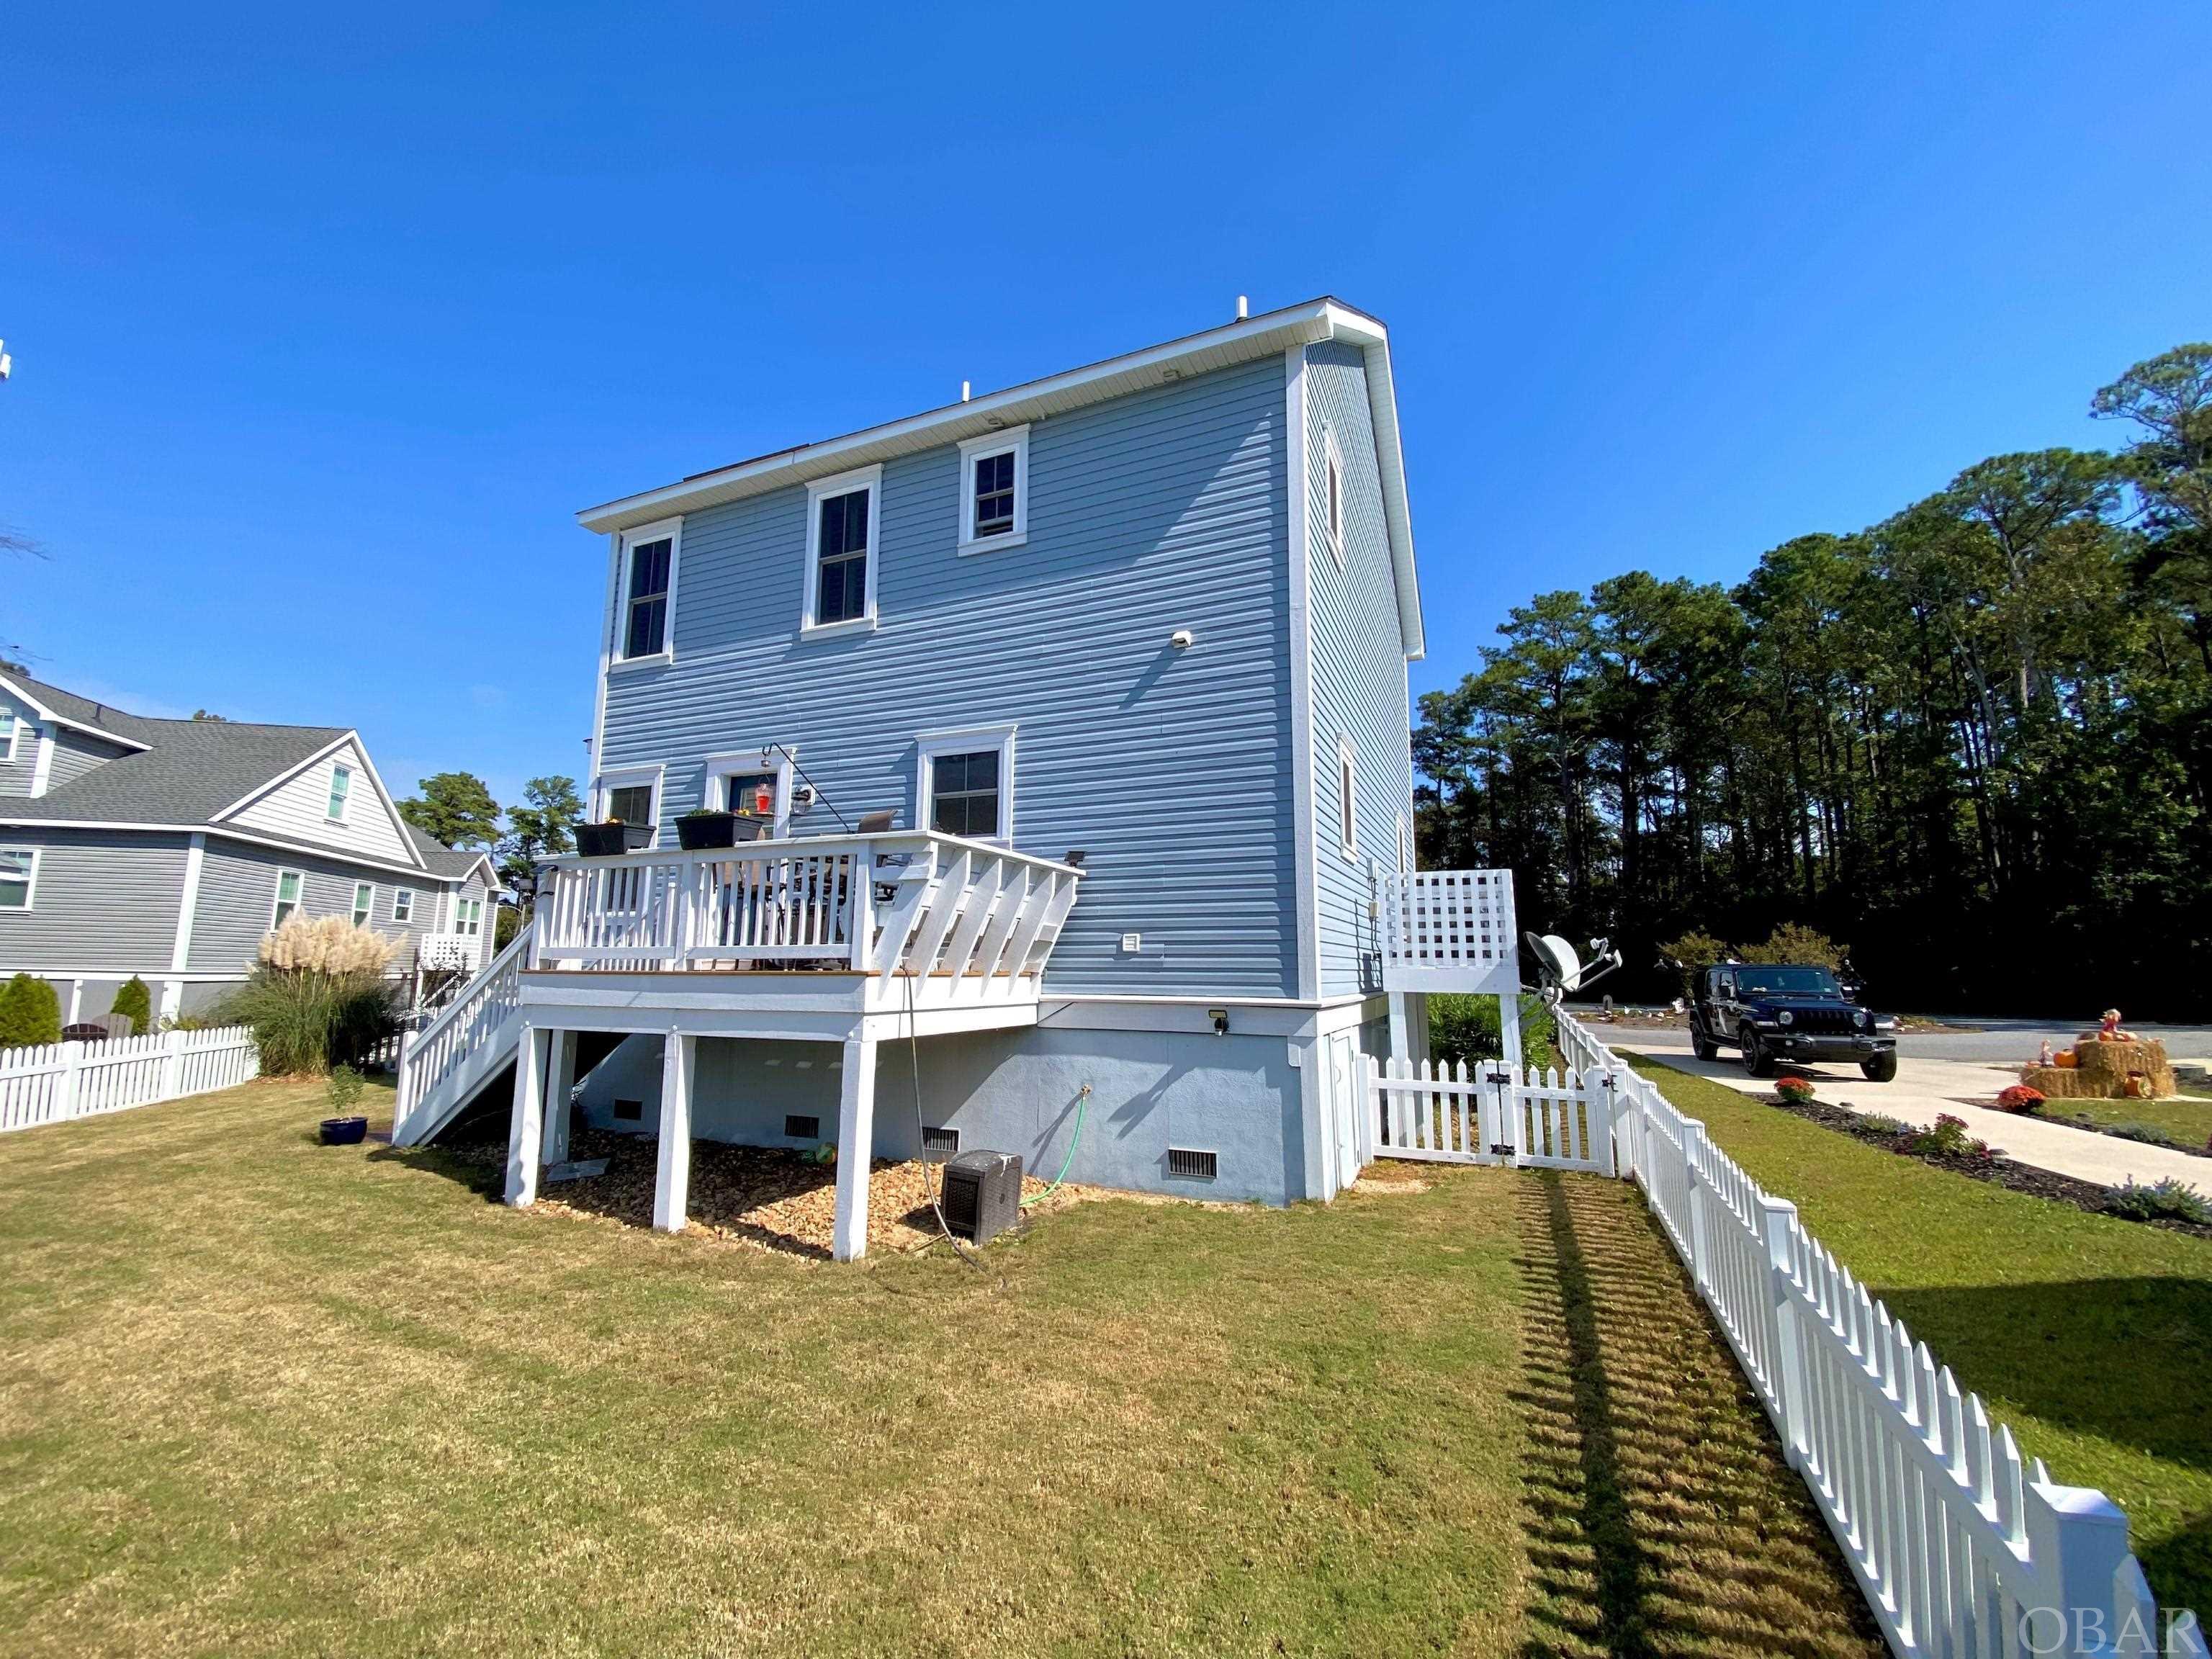 101 Flats Court, Manteo, NC 27954, 3 Bedrooms Bedrooms, ,2 BathroomsBathrooms,Residential,For Sale,Flats Court,120607